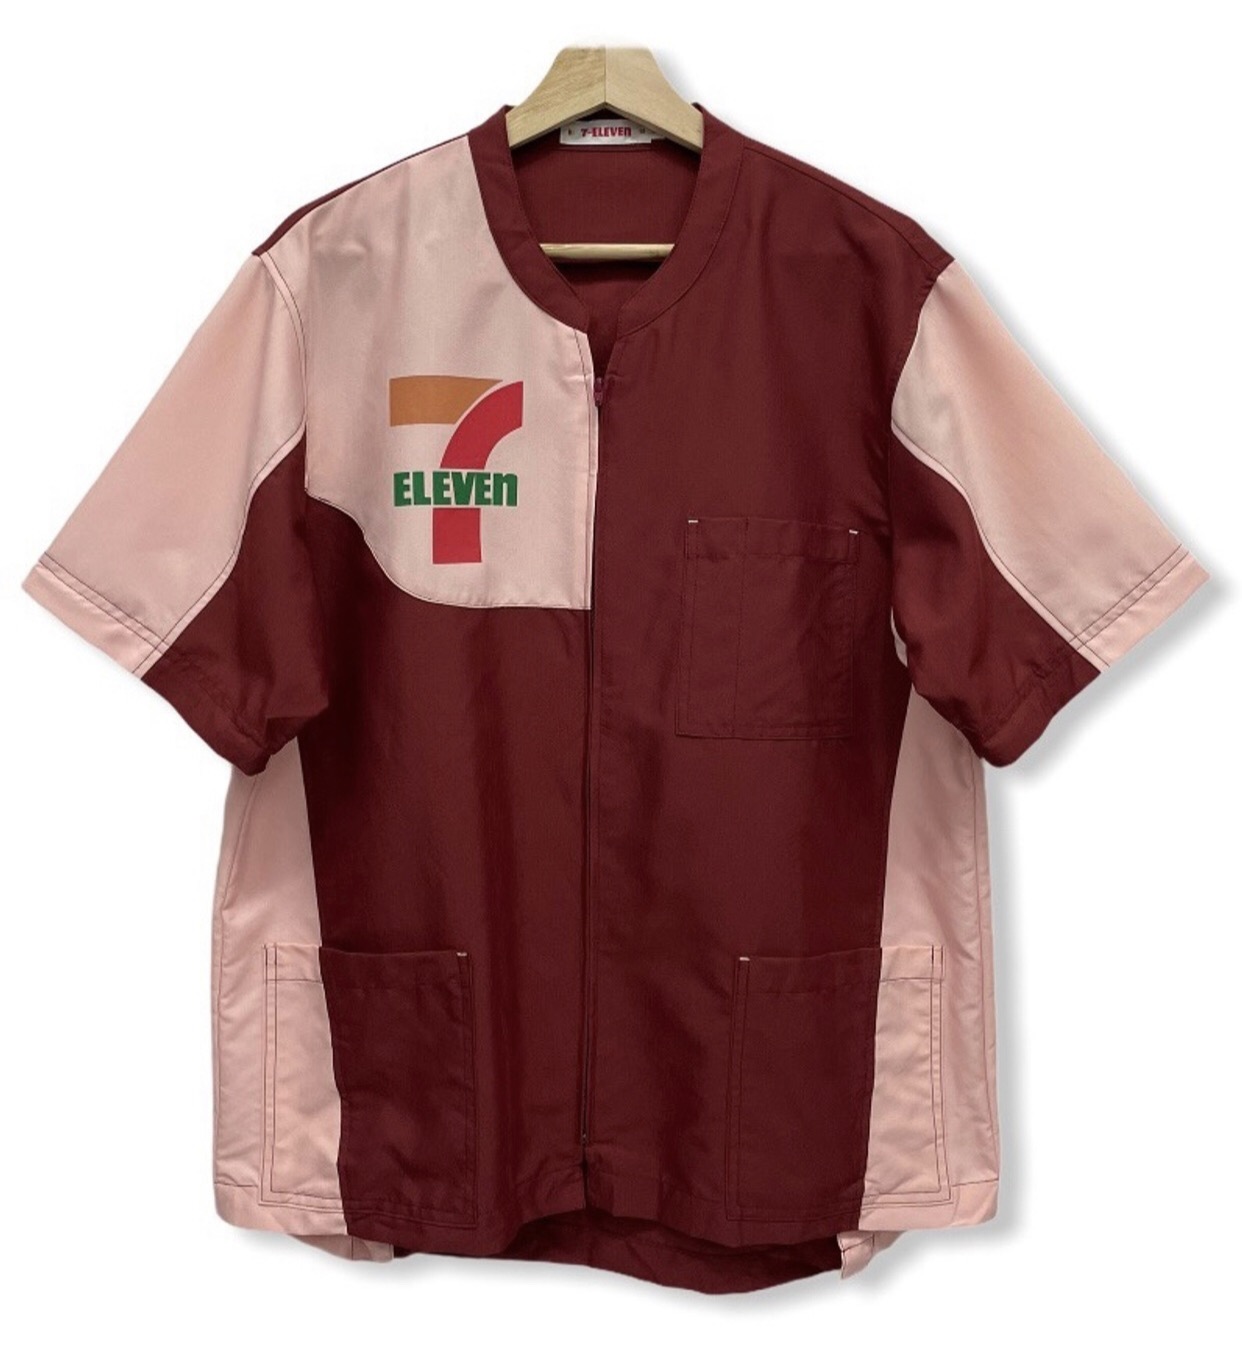 🇯🇵 Vintage 90s 7-Eleven Uniform Workers Collection Shirts - 3